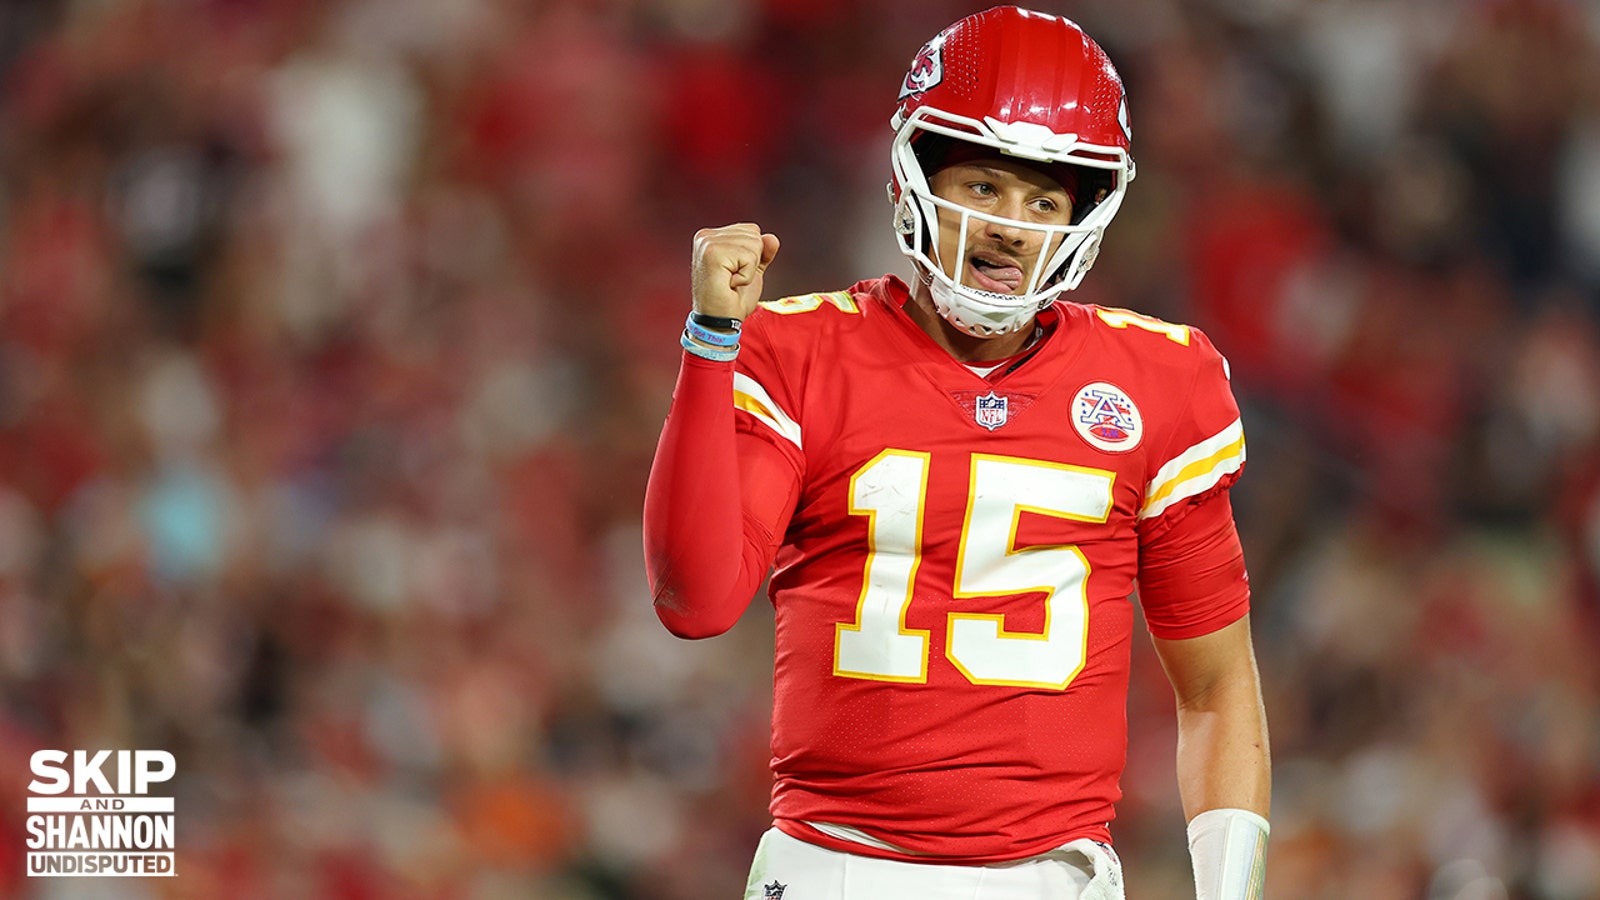 Patrick Mahomes is billed as the best quarterback in the NFL